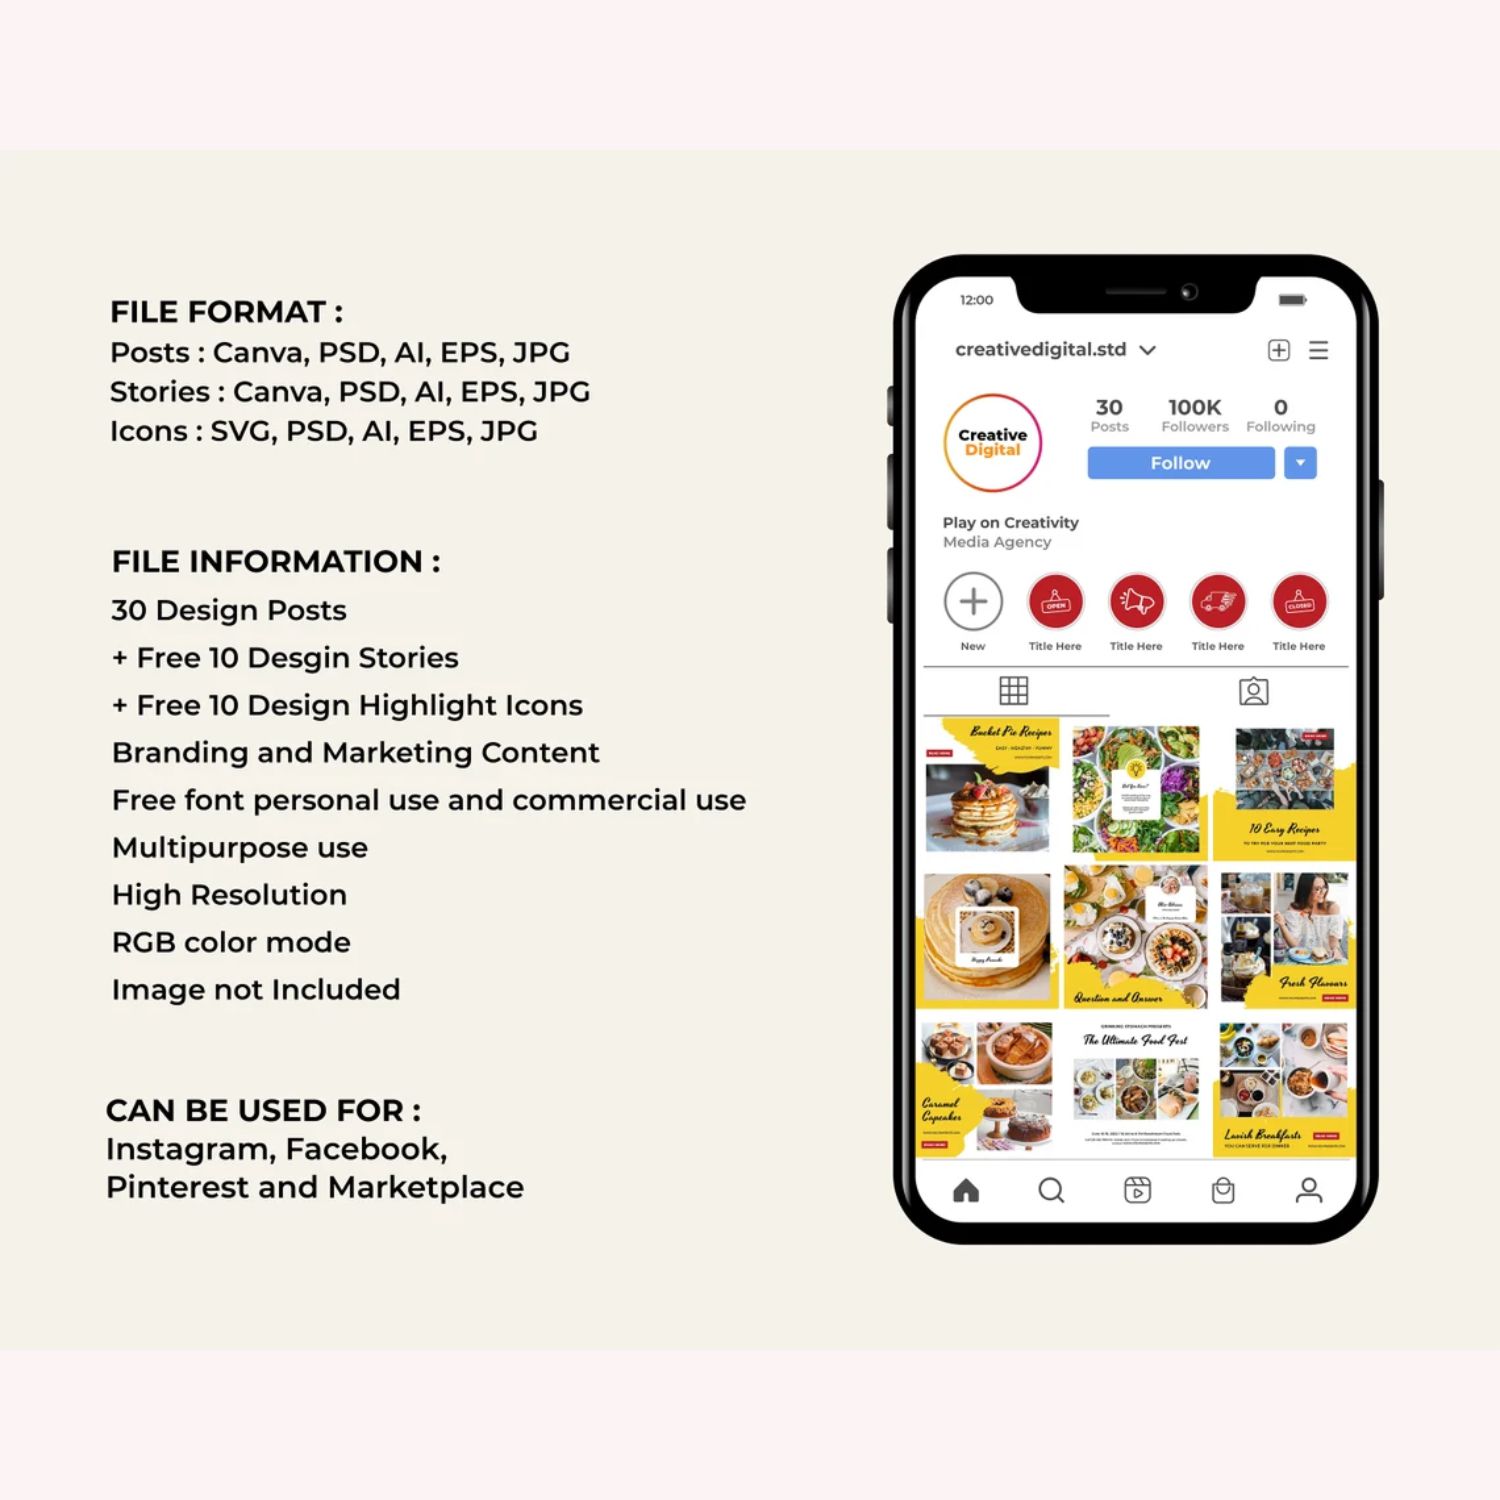 Restaurant Food Blogger Story And Icon Social Media Template Description.